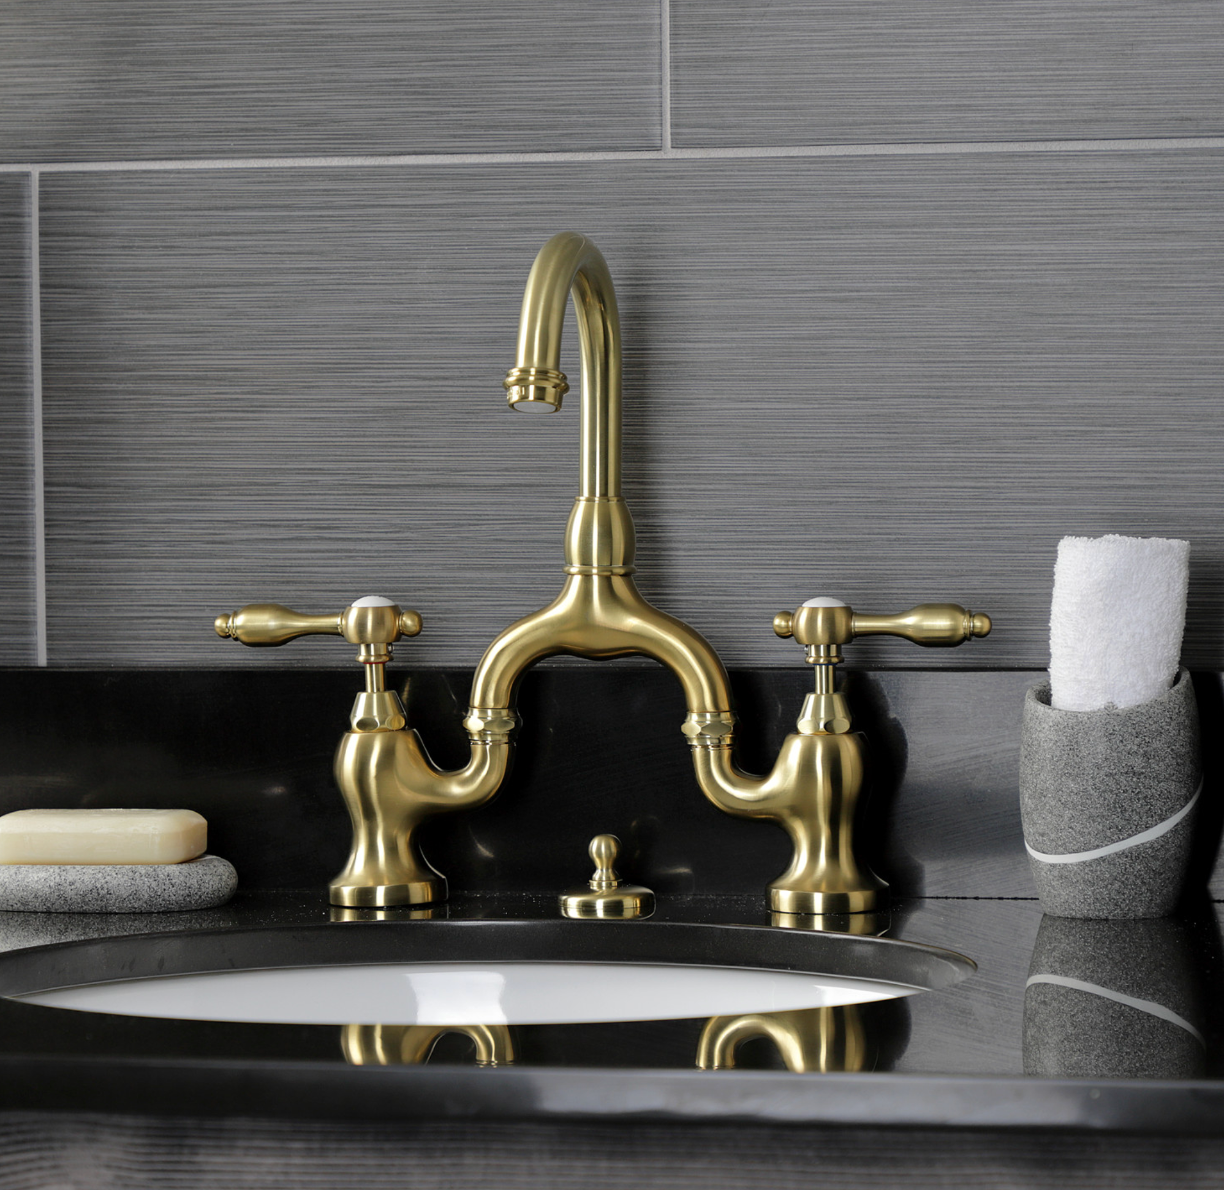 French Country Bridge Bathroom Faucet